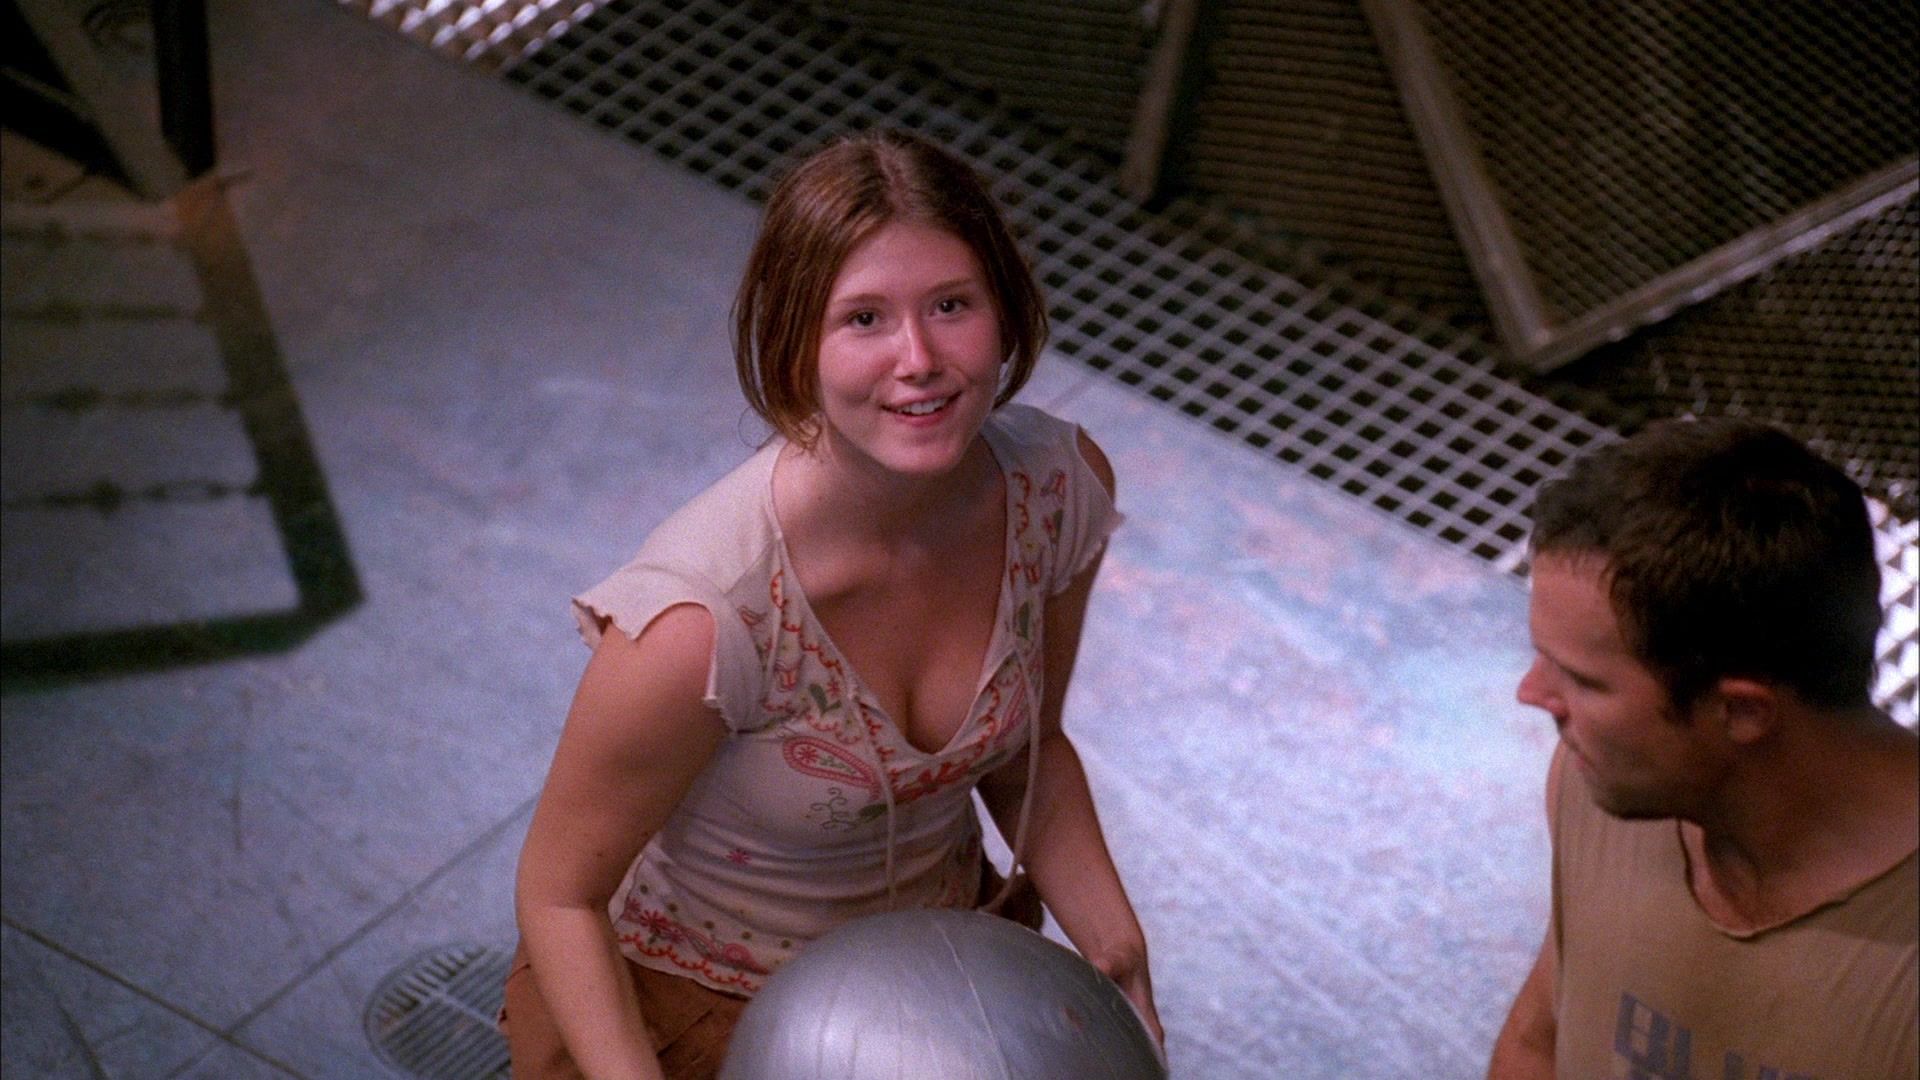 Kaylee looks up towards the camera, she's holding an oversized silver ball.